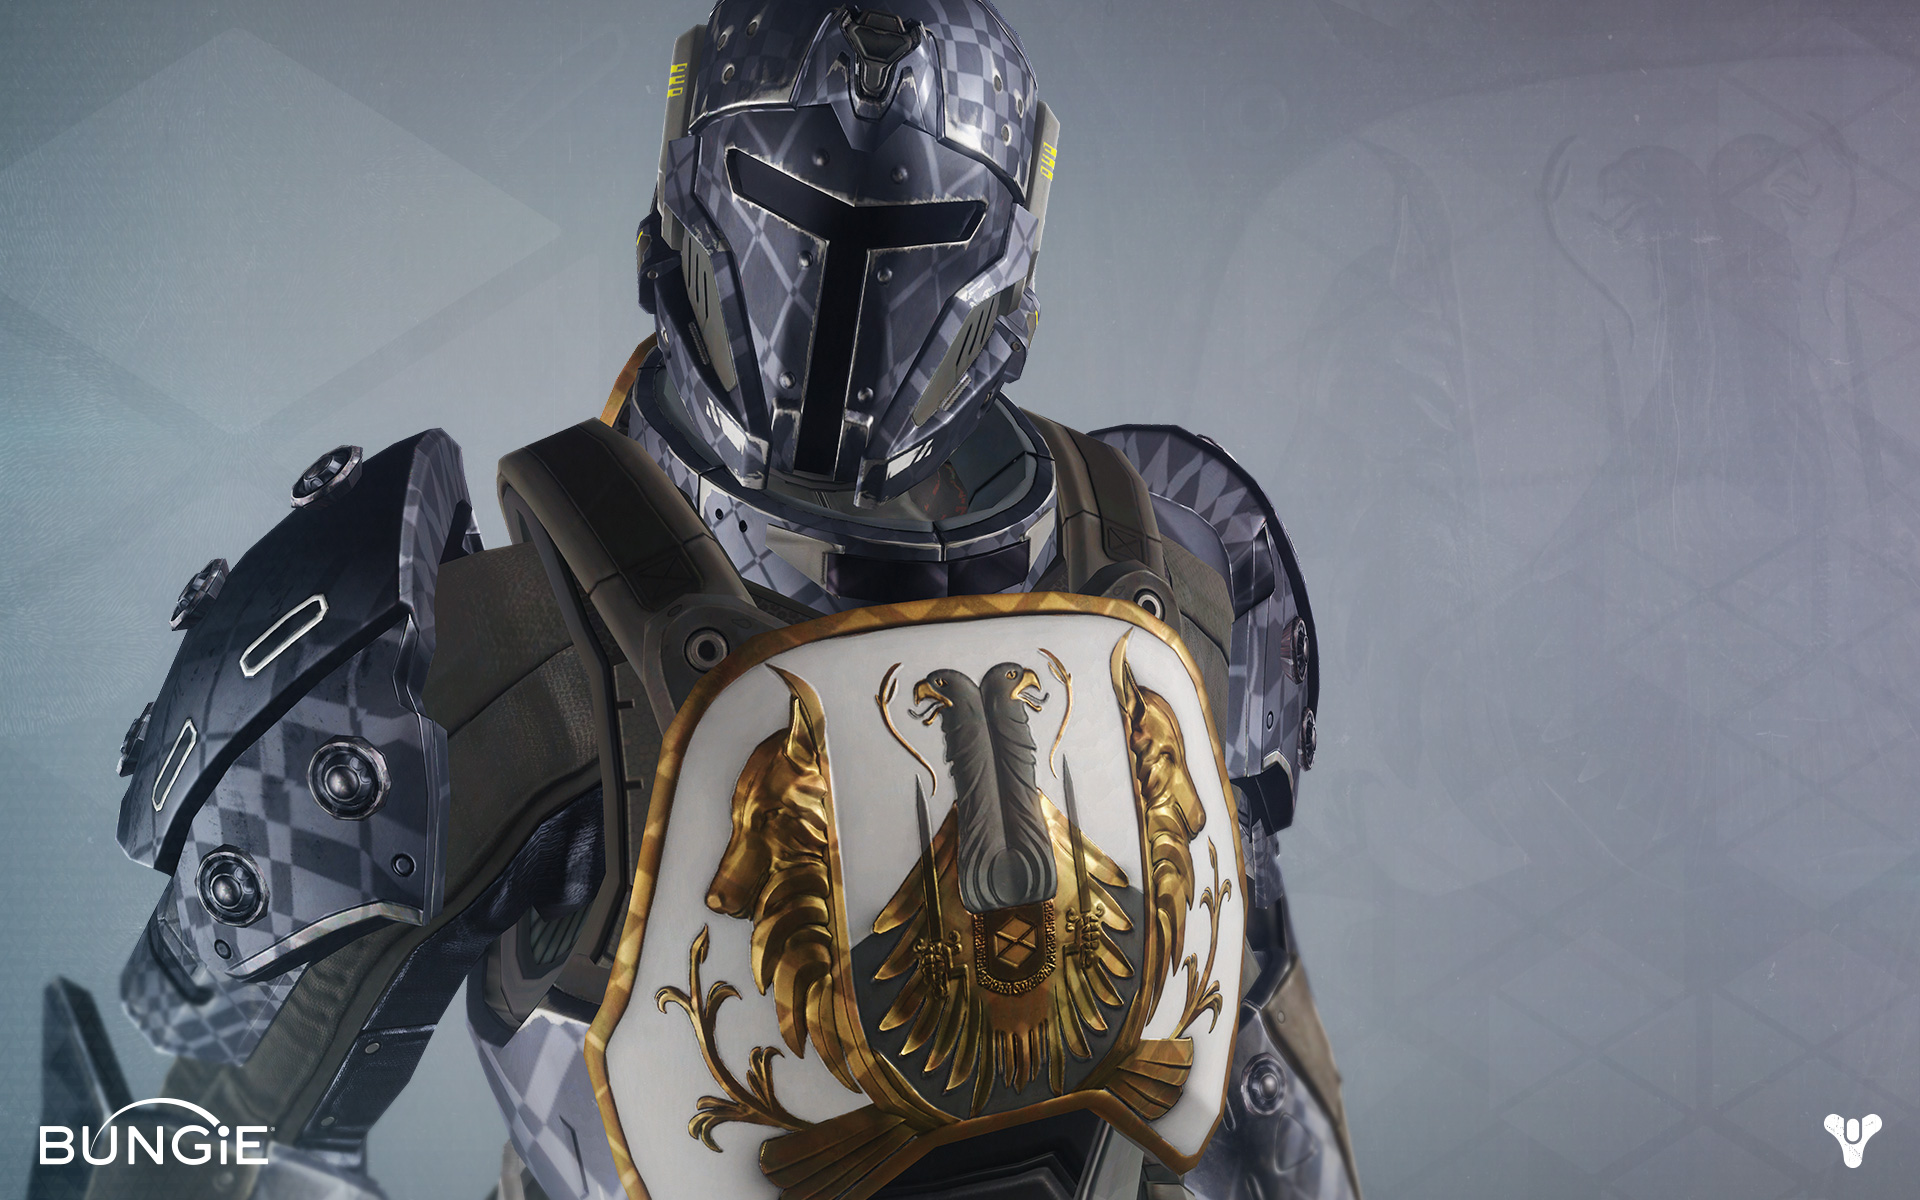 Destiny character design video released by Bungie - Post Game Lobby